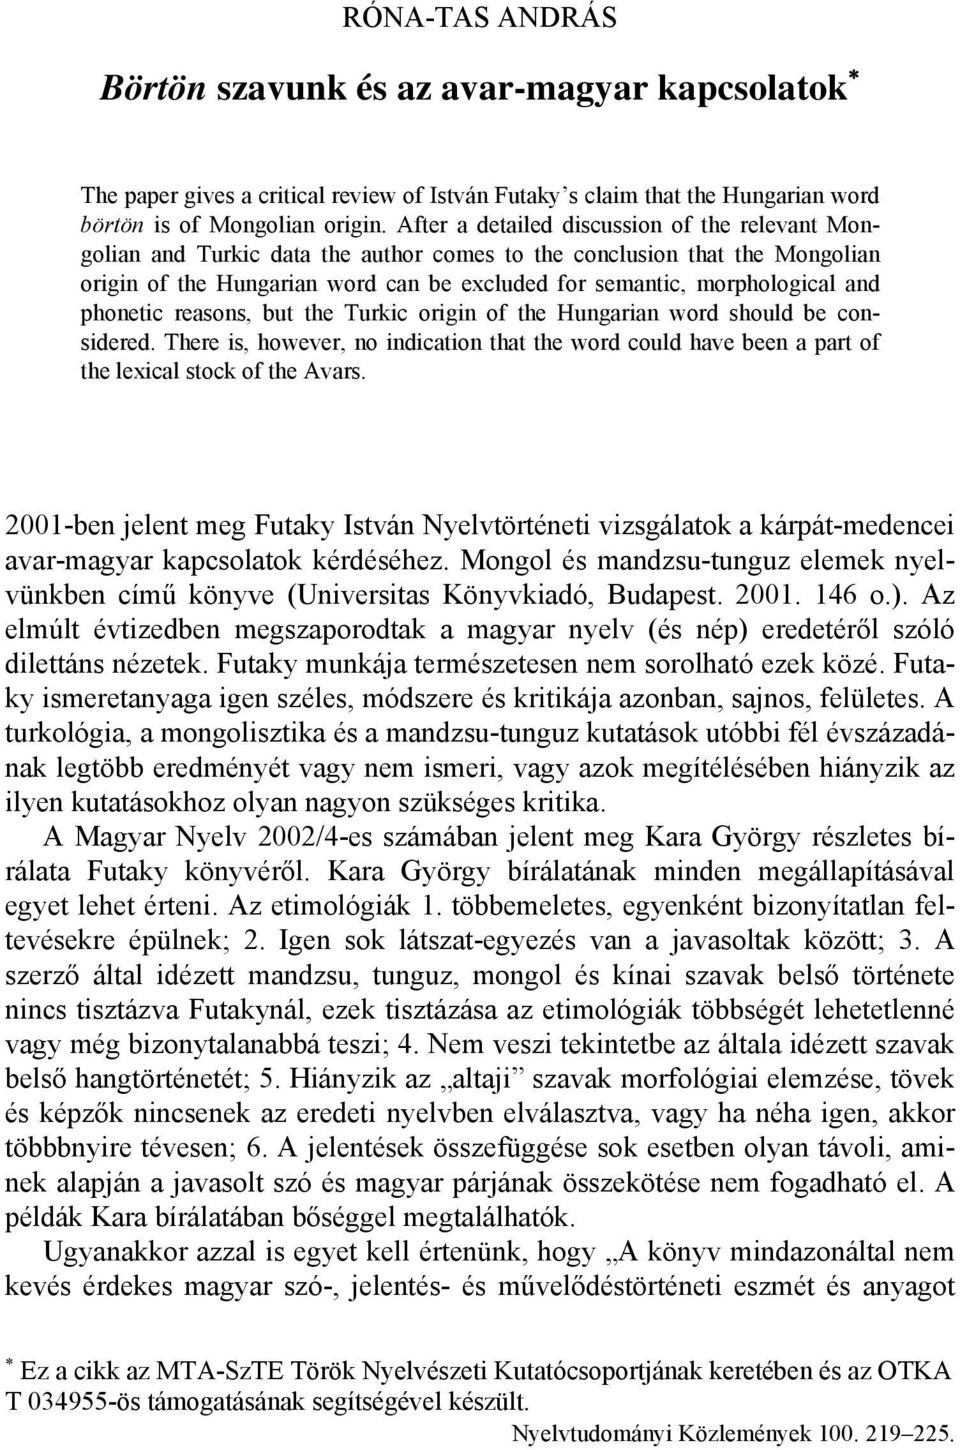 and phonetic reasons, but the Turkic origin of the Hungarian word should be considered. There is, however, no indication that the word could have been a part of the lexical stock of the Avars.